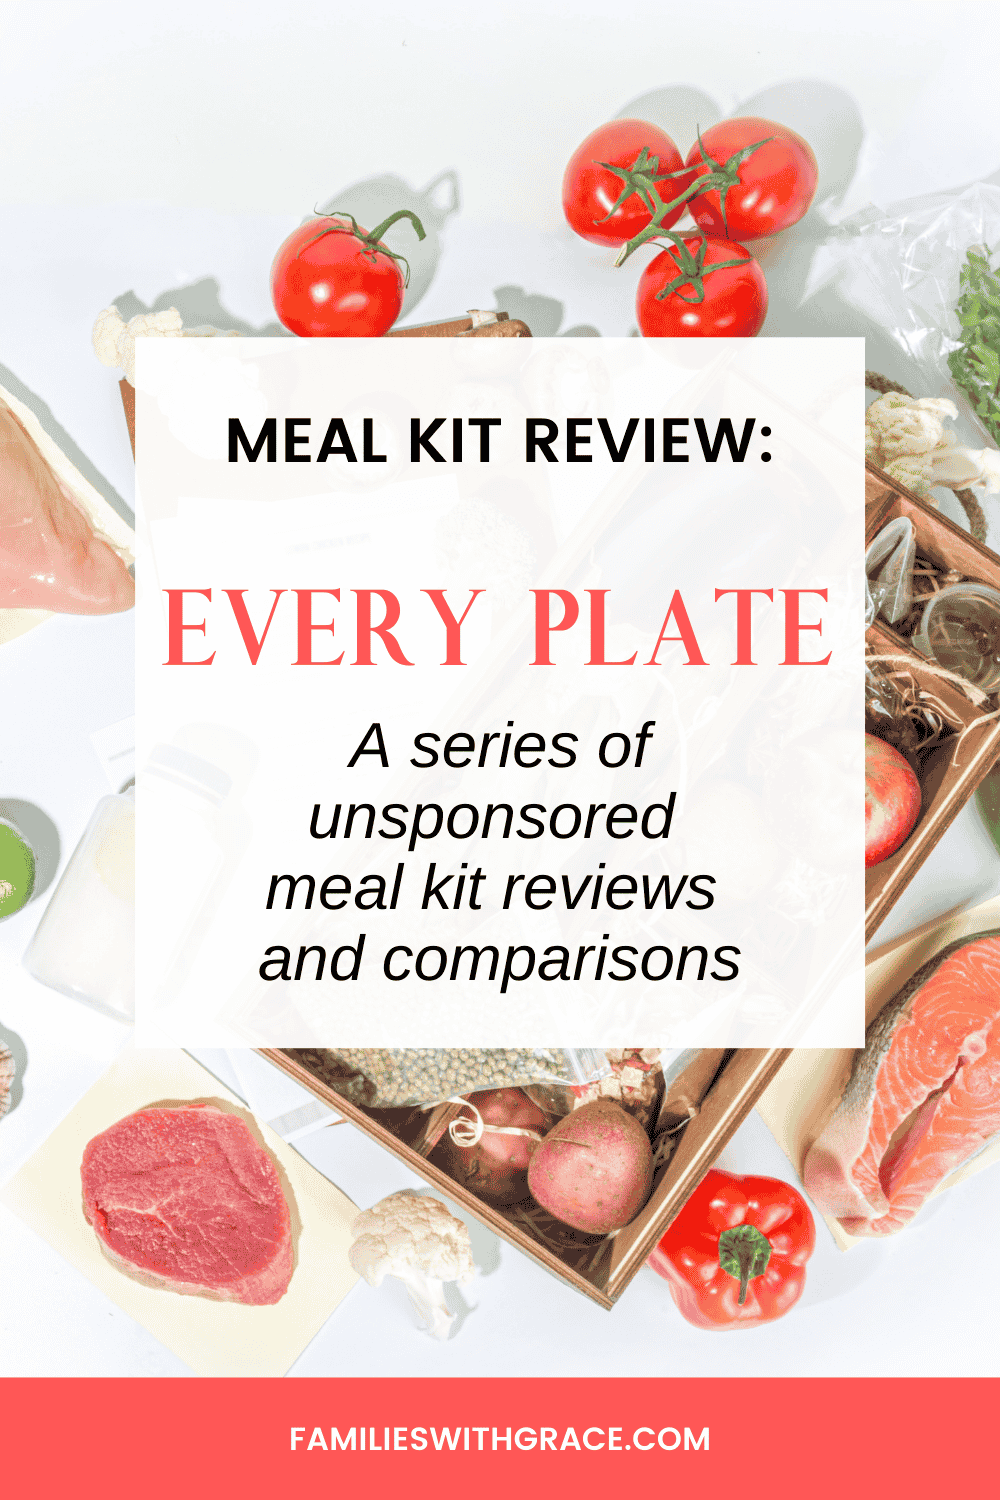 Meal kit review: Every Plate